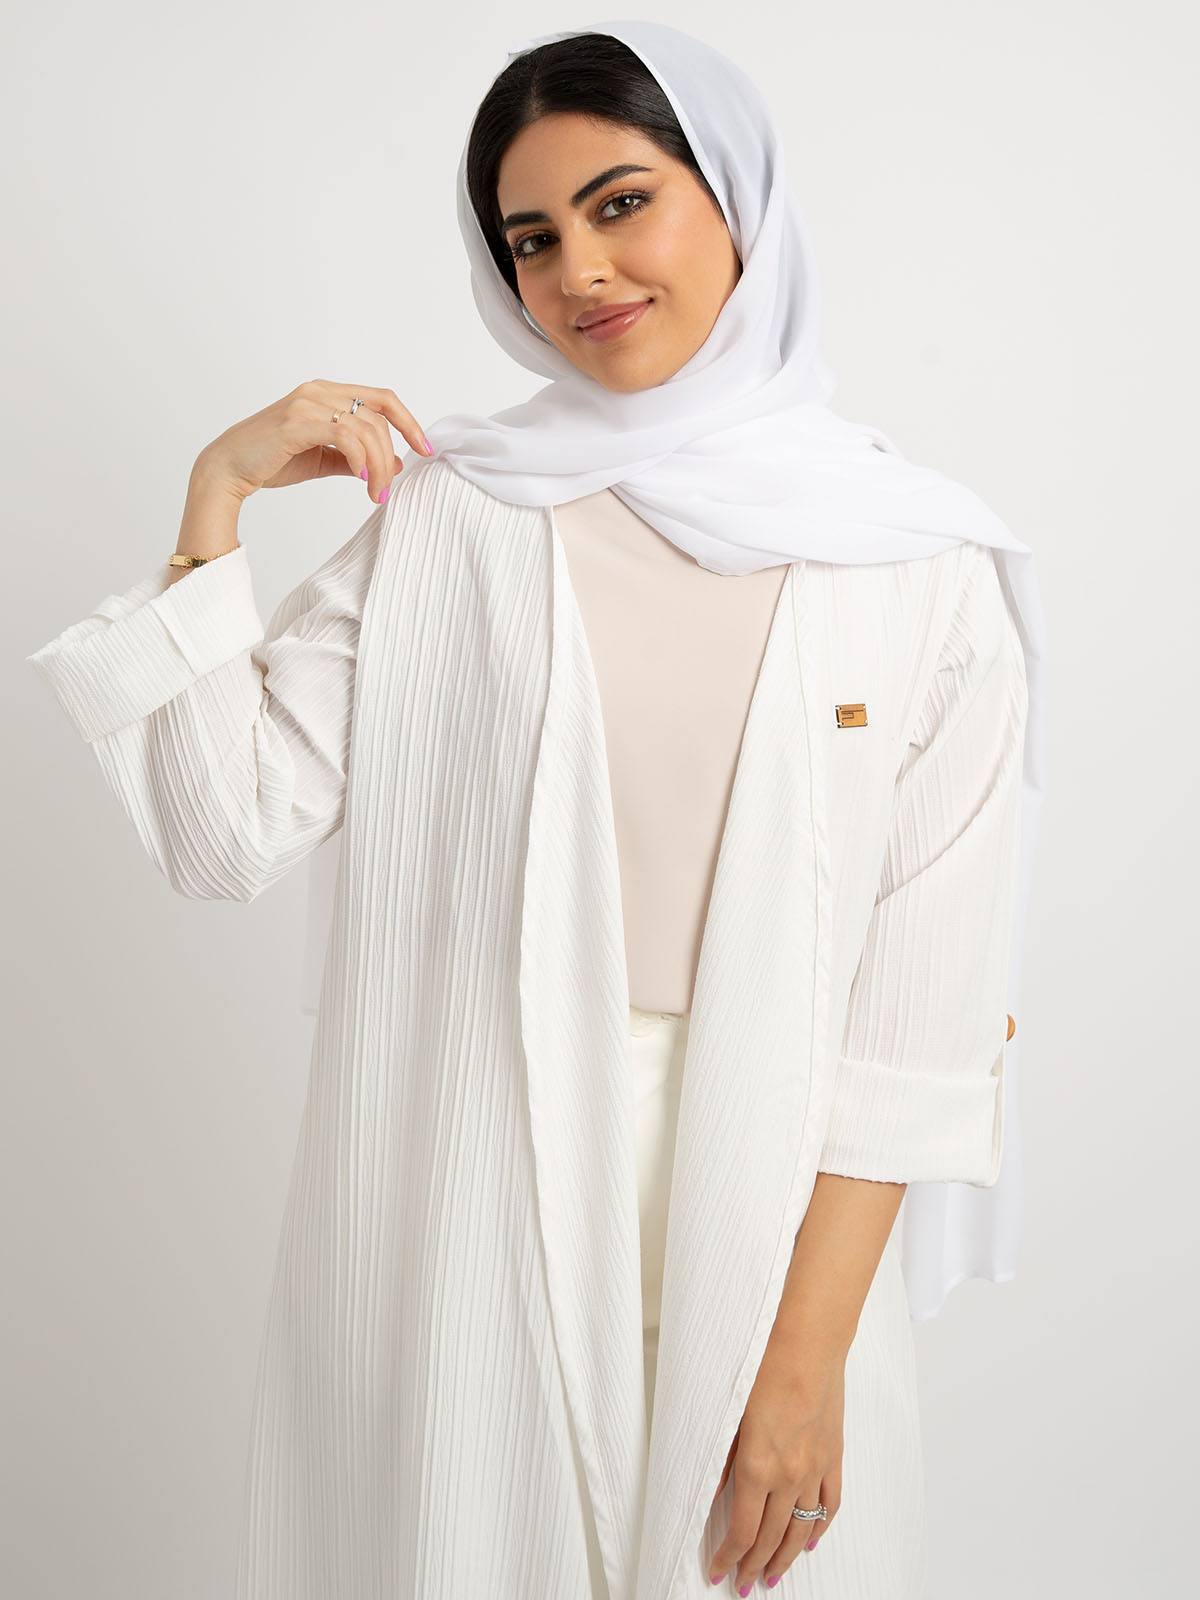 Kaafmeem women clothing regular fit white comfy long abaya for everyday in wrinkle free fabric for work or outings